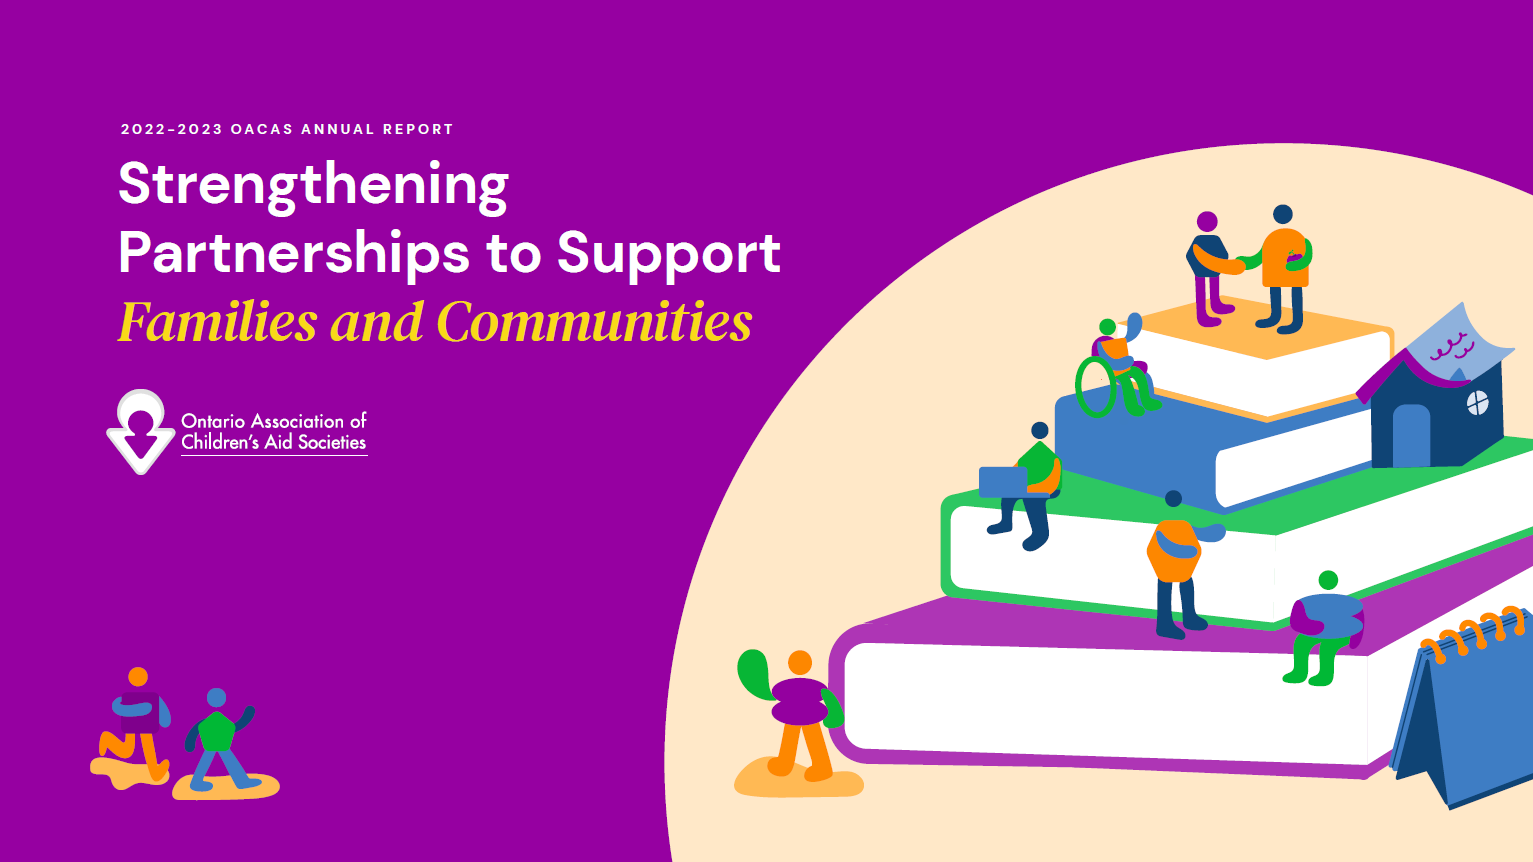 OACAS Releases 2022-2023 Annual Report: Strengthening Partnerships to Support Families and Communities